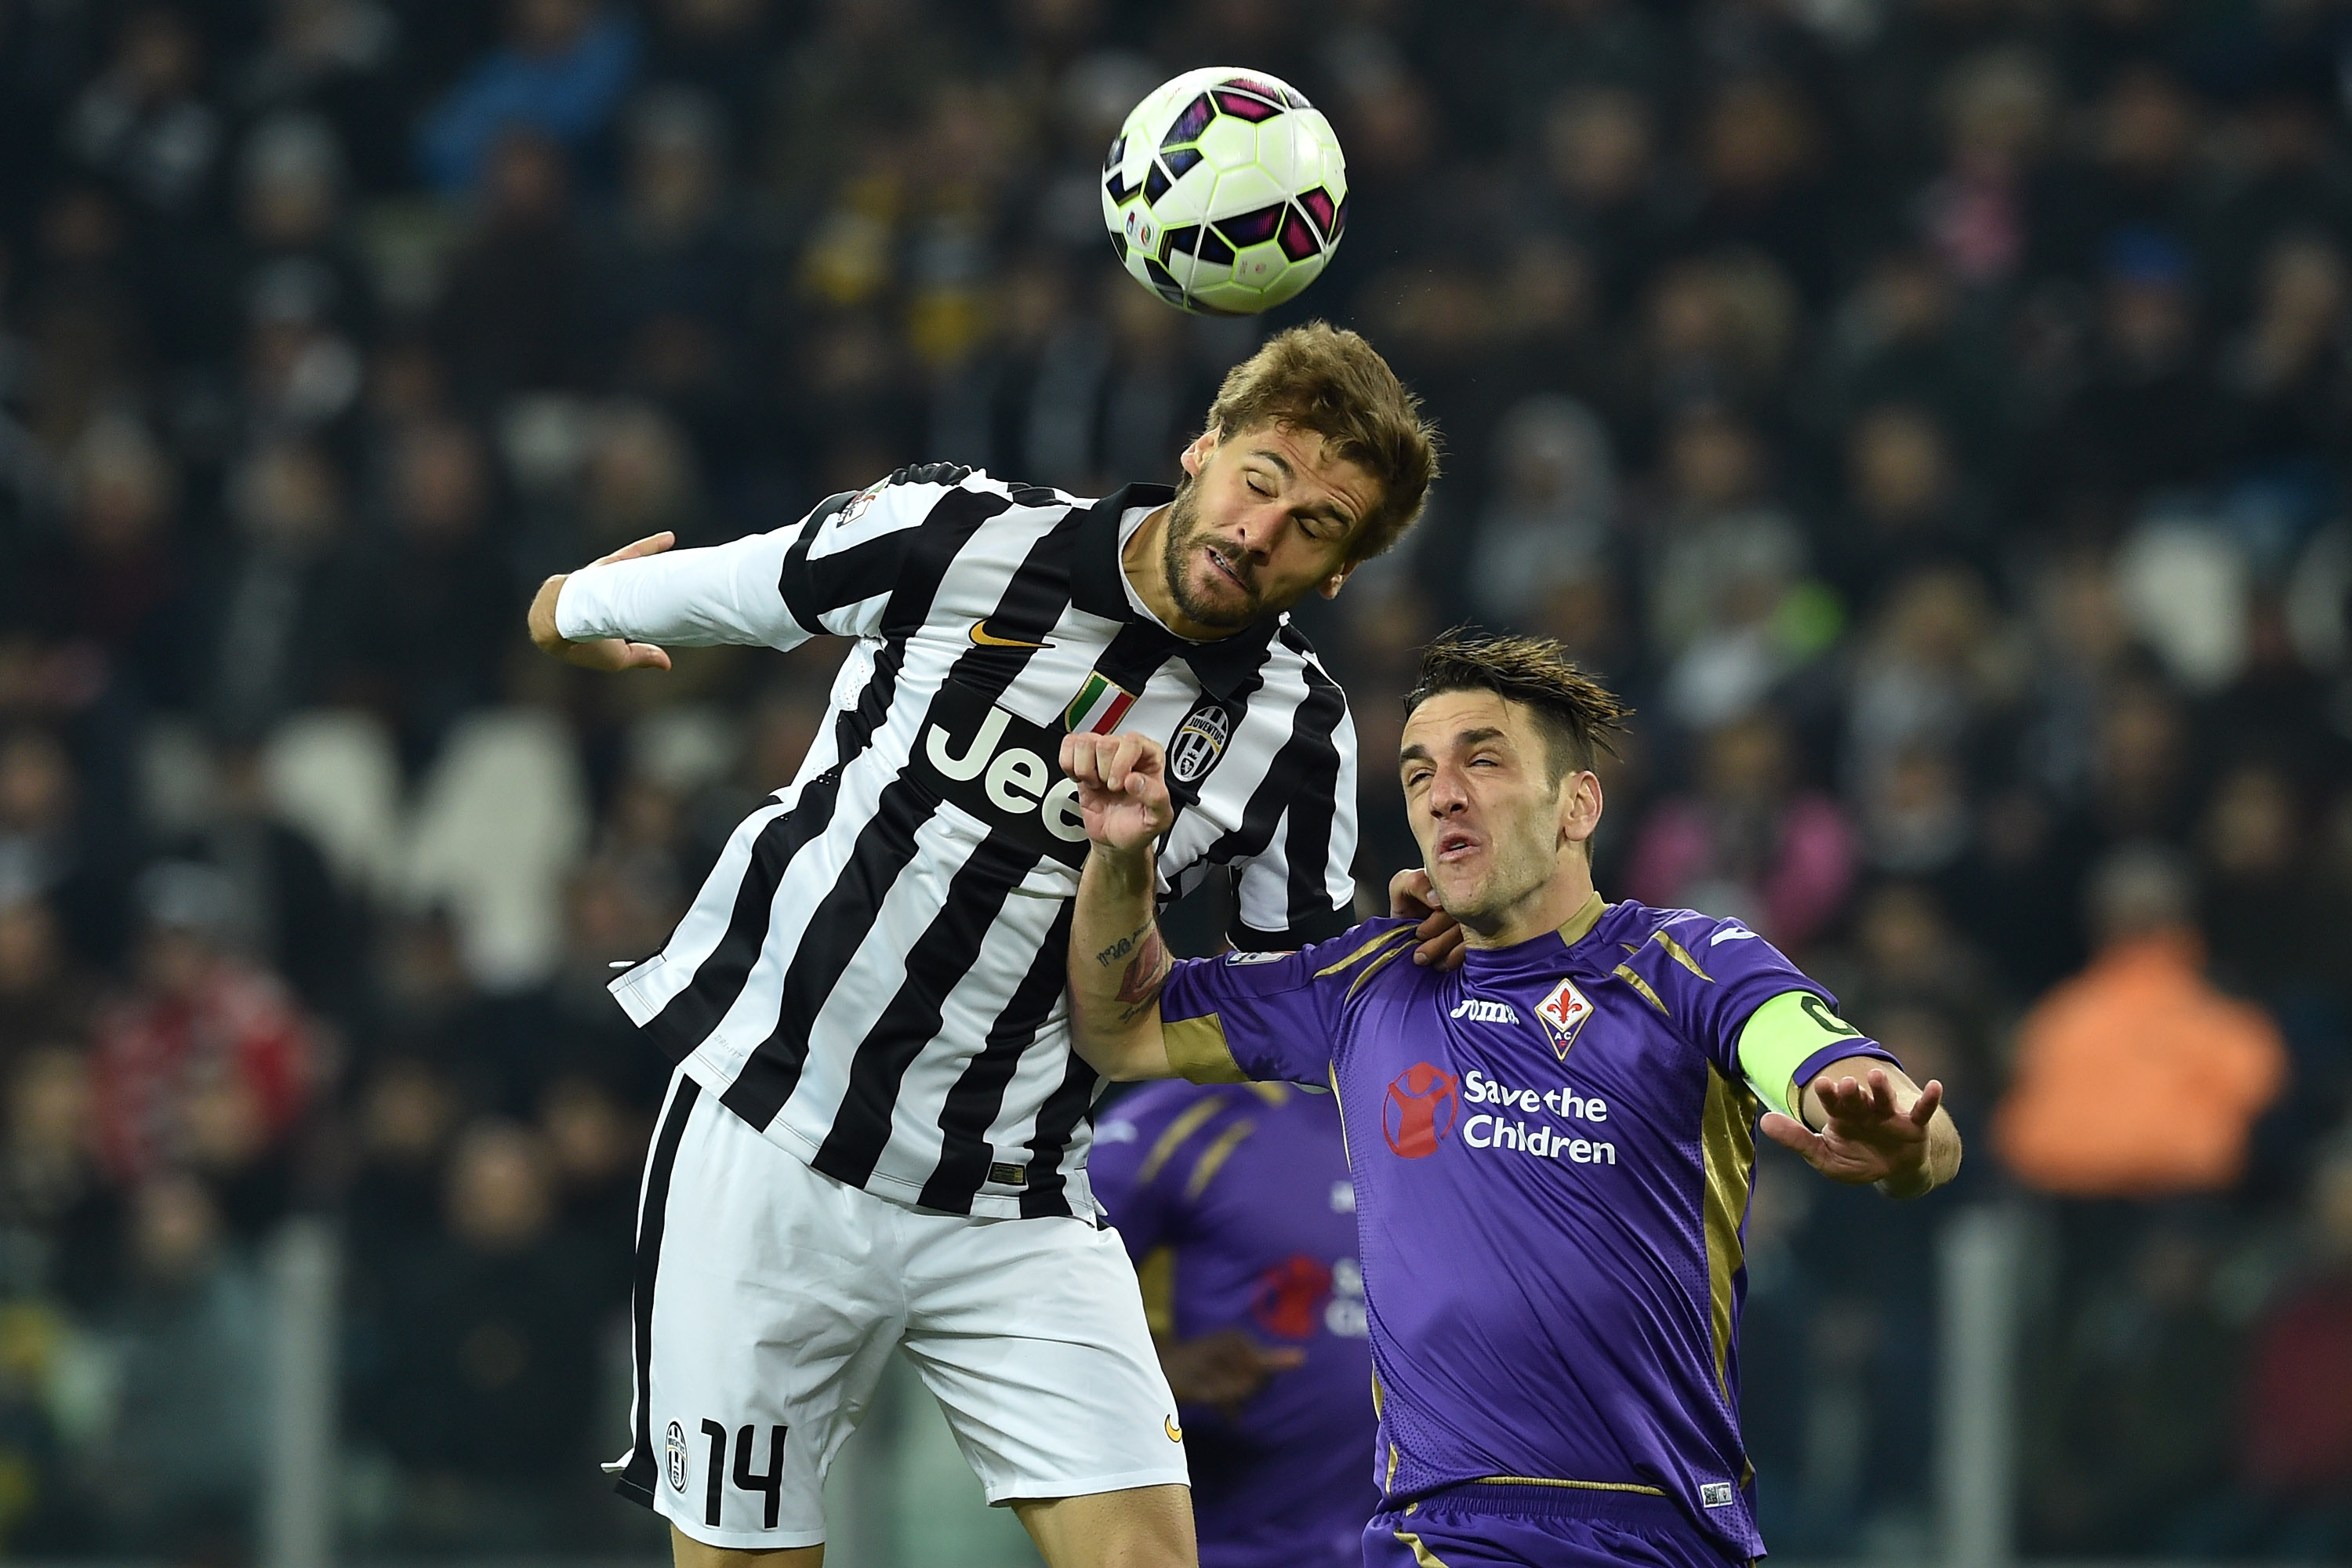 Goals and Highlights Fiorentina 0-1 Juventus in Serie A